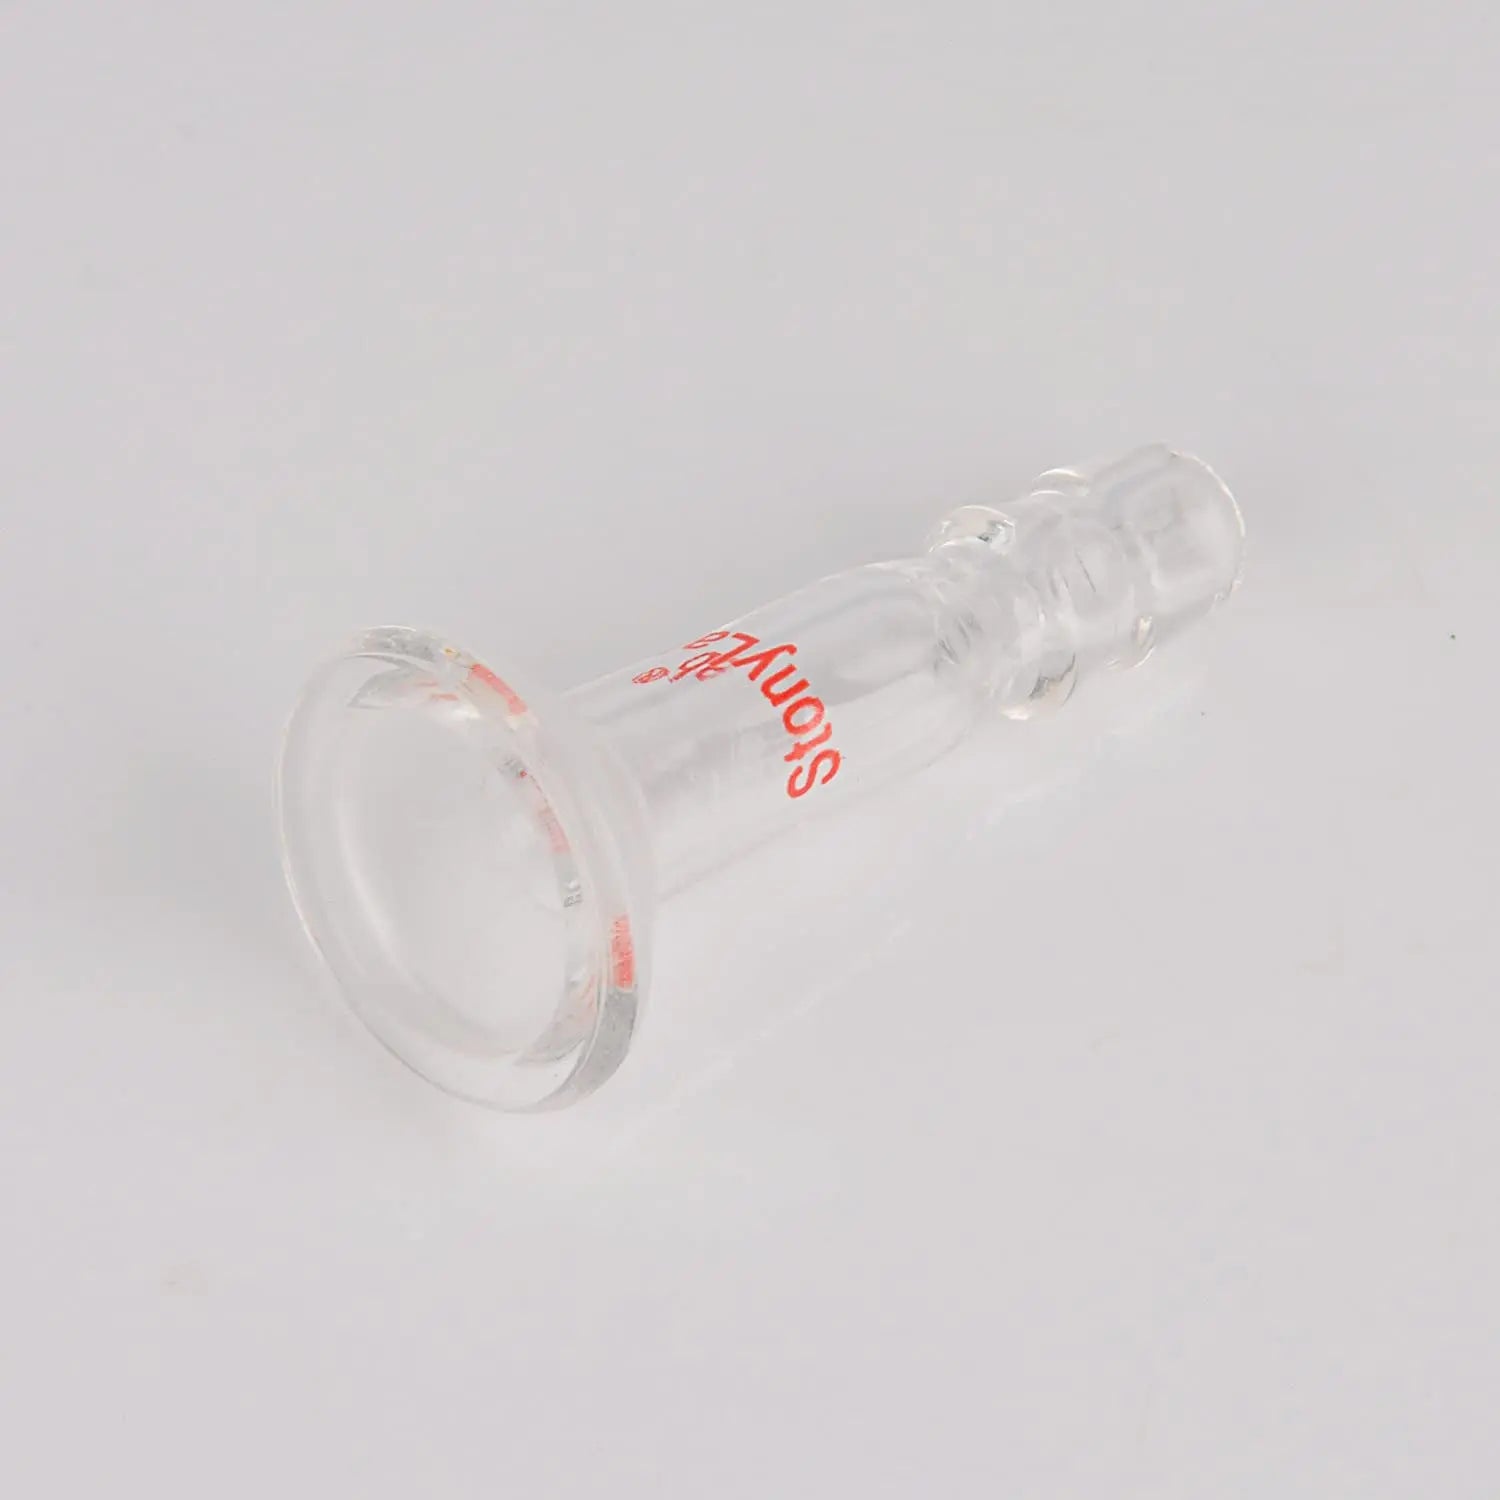 Glass 15 O-Ring to 10 mm Serrated Hose Connection Adapter for Laboratory Adapters - Inlets / Thermometer